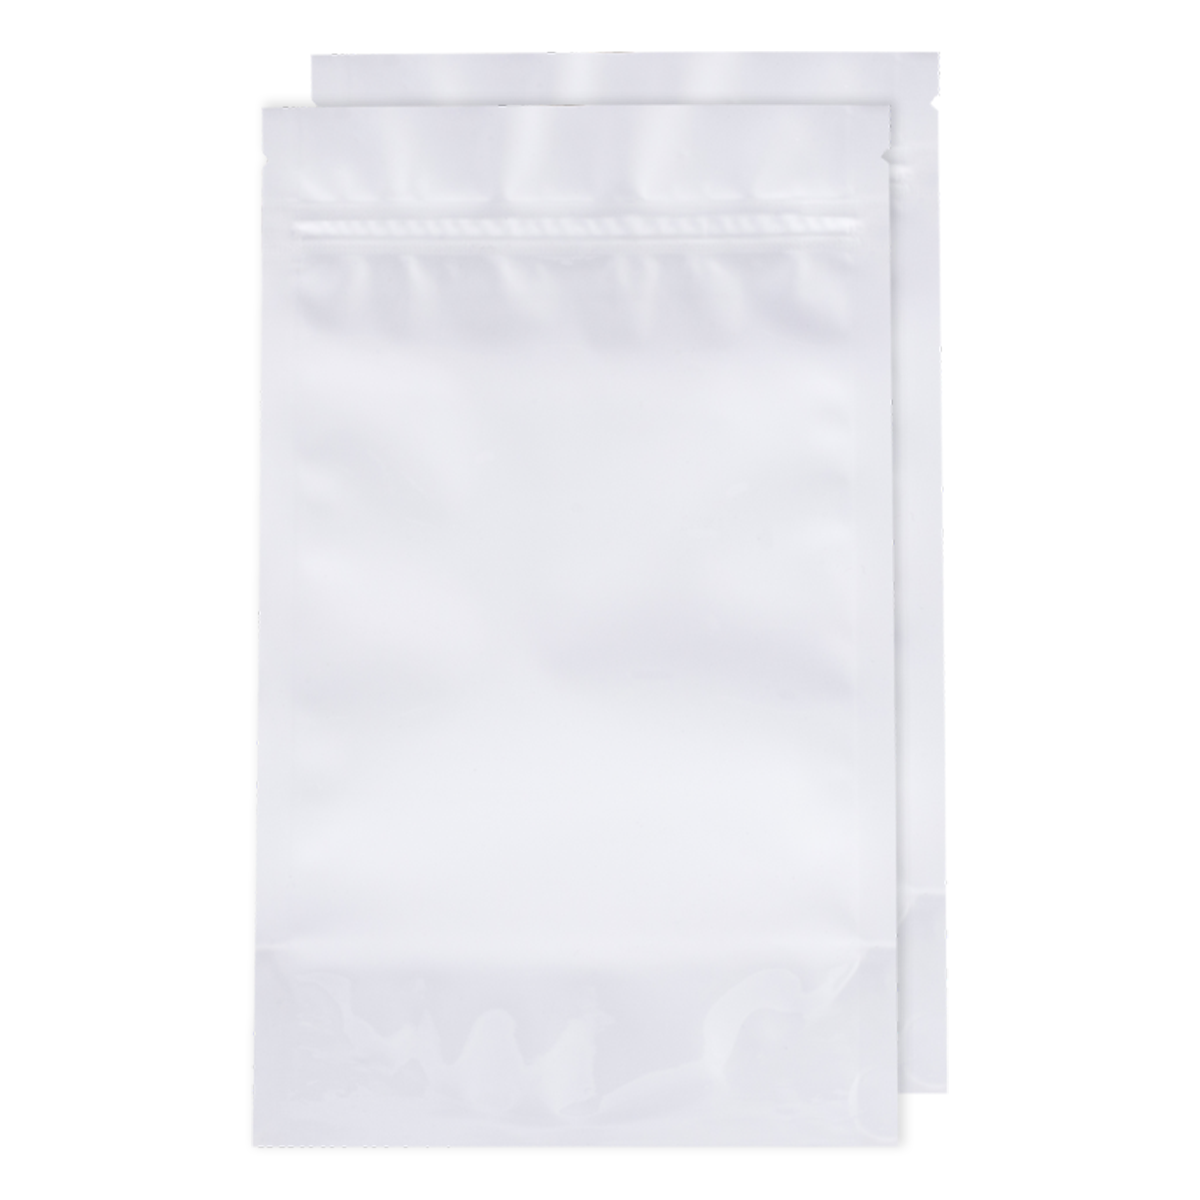 Photo of Half Ounce White/White Opaque Barrier Bags